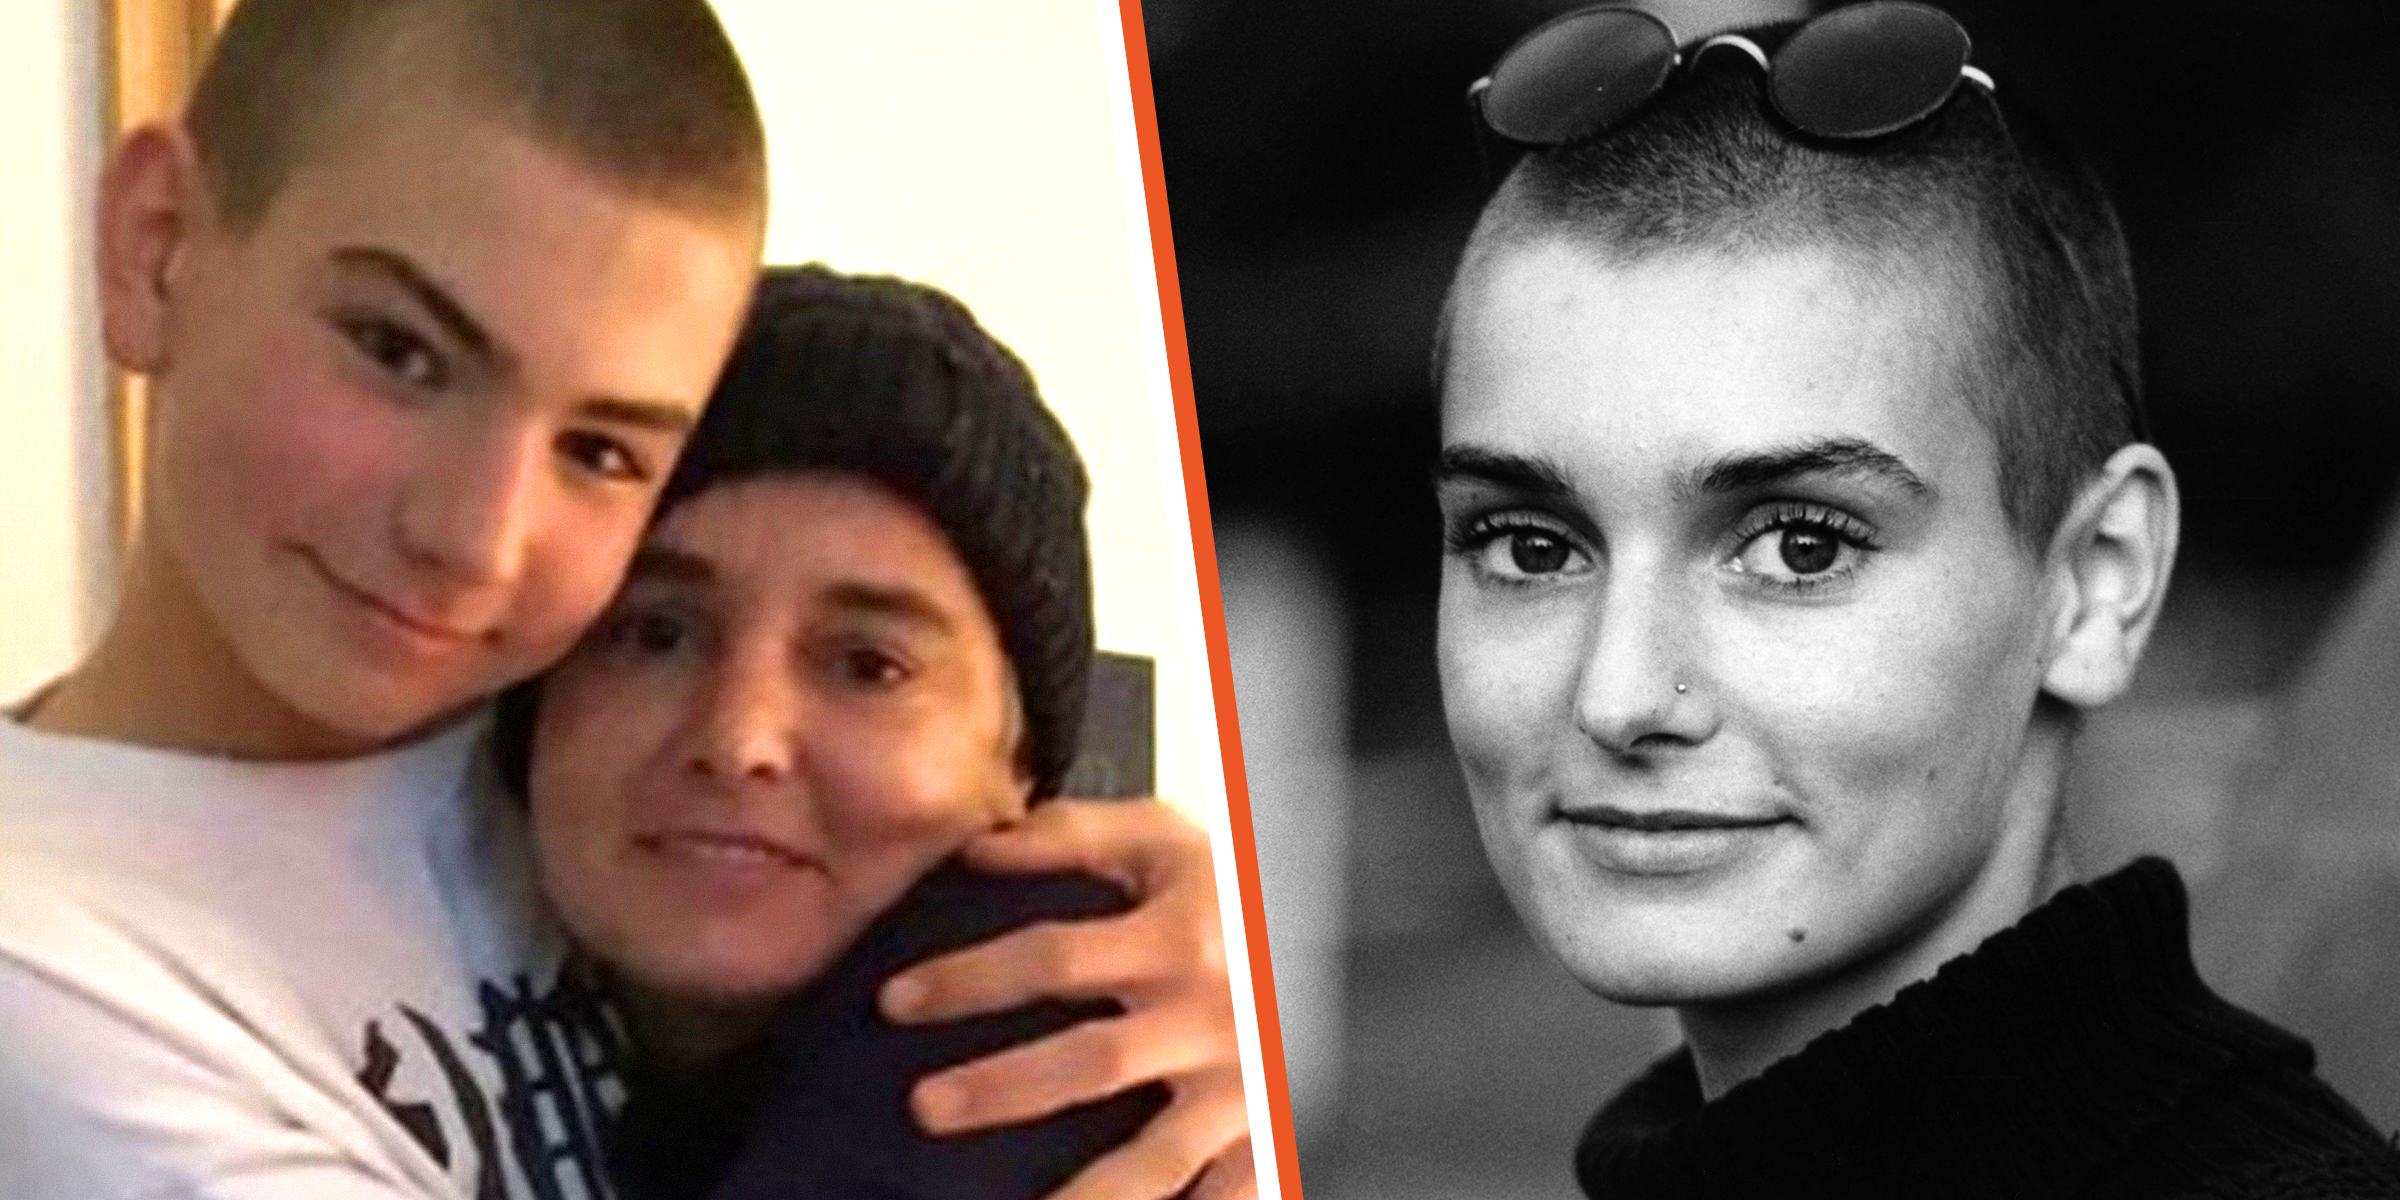 Shane et Sinéad O'Connor | Sources : Twitter/786OmShahid | Getty Images